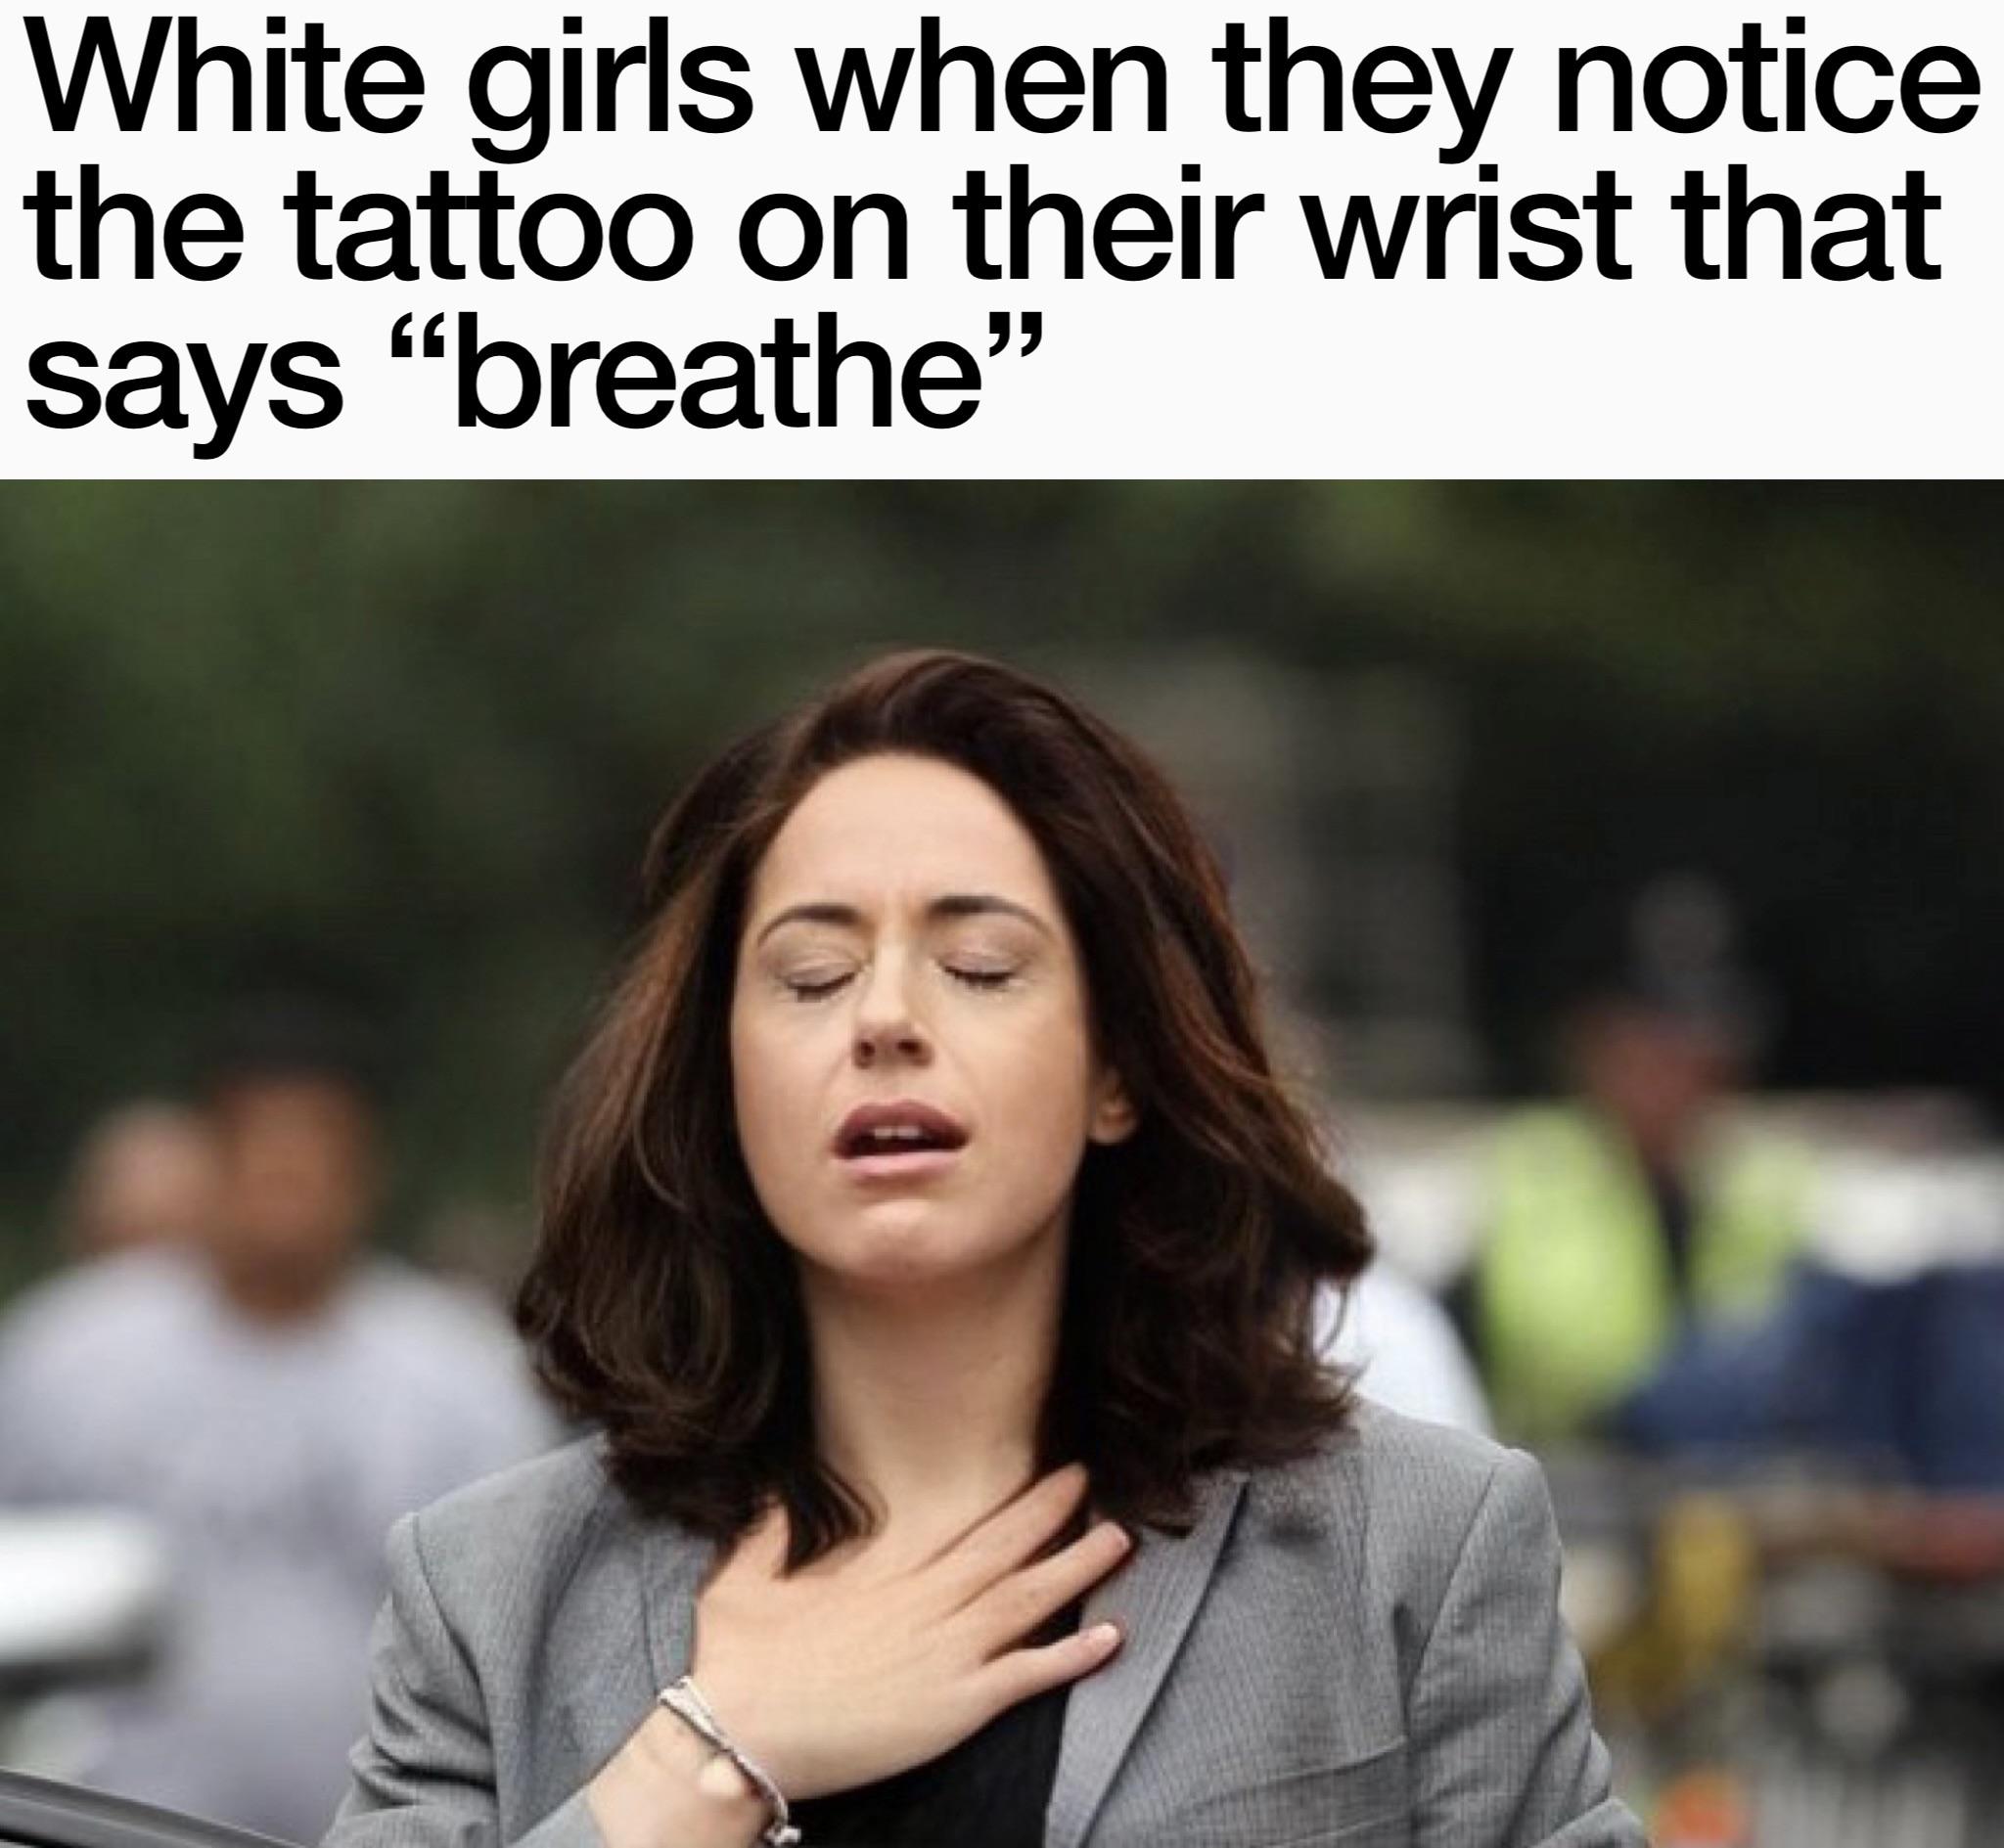 dank memes - craft beer meme - White girls when they notice the tattoo on their wrist that says "breathe"